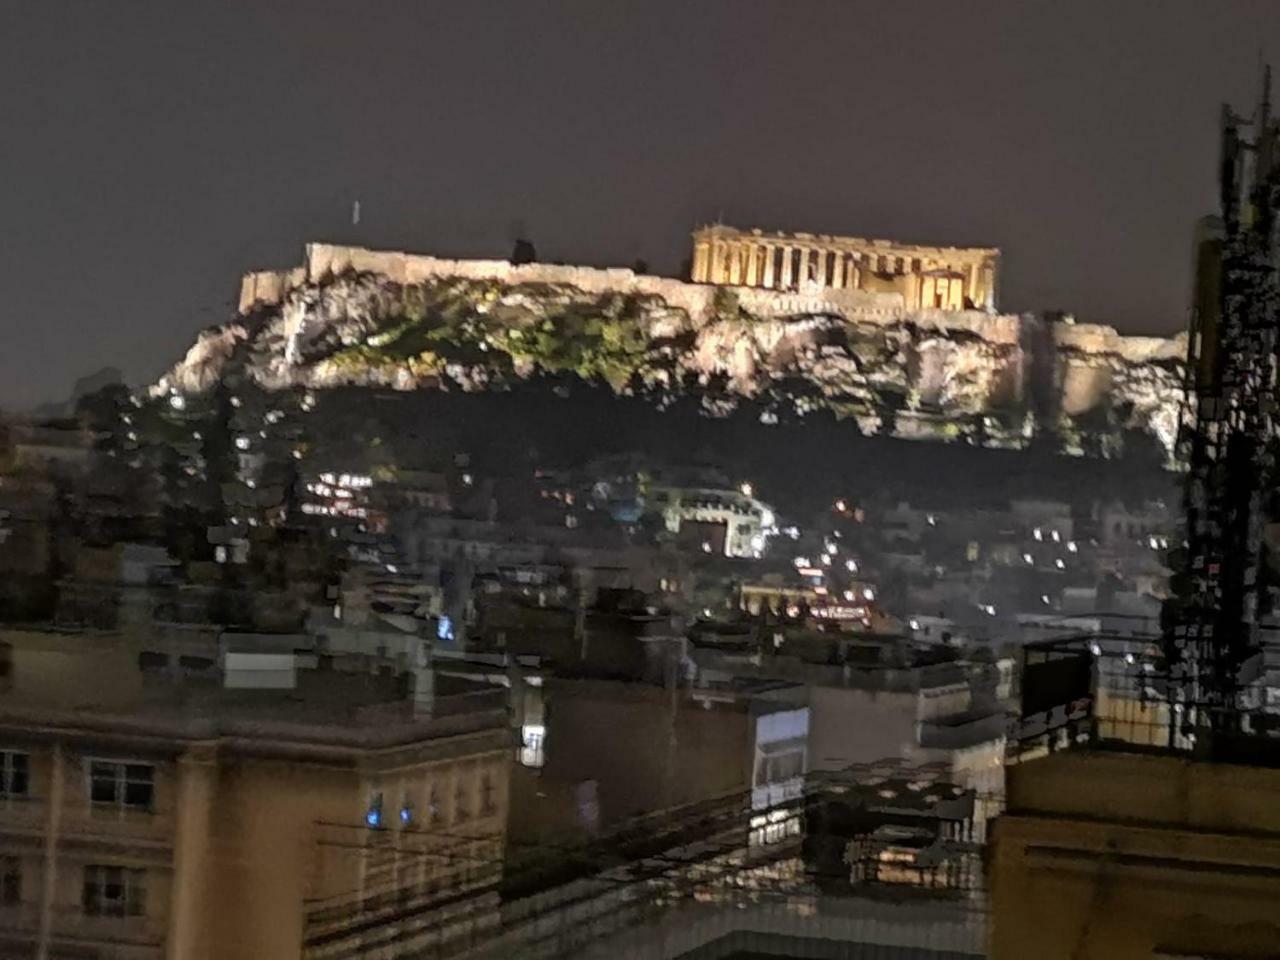 Triple A - Acropolis View In The City Center - Free Parking! 雅典 外观 照片